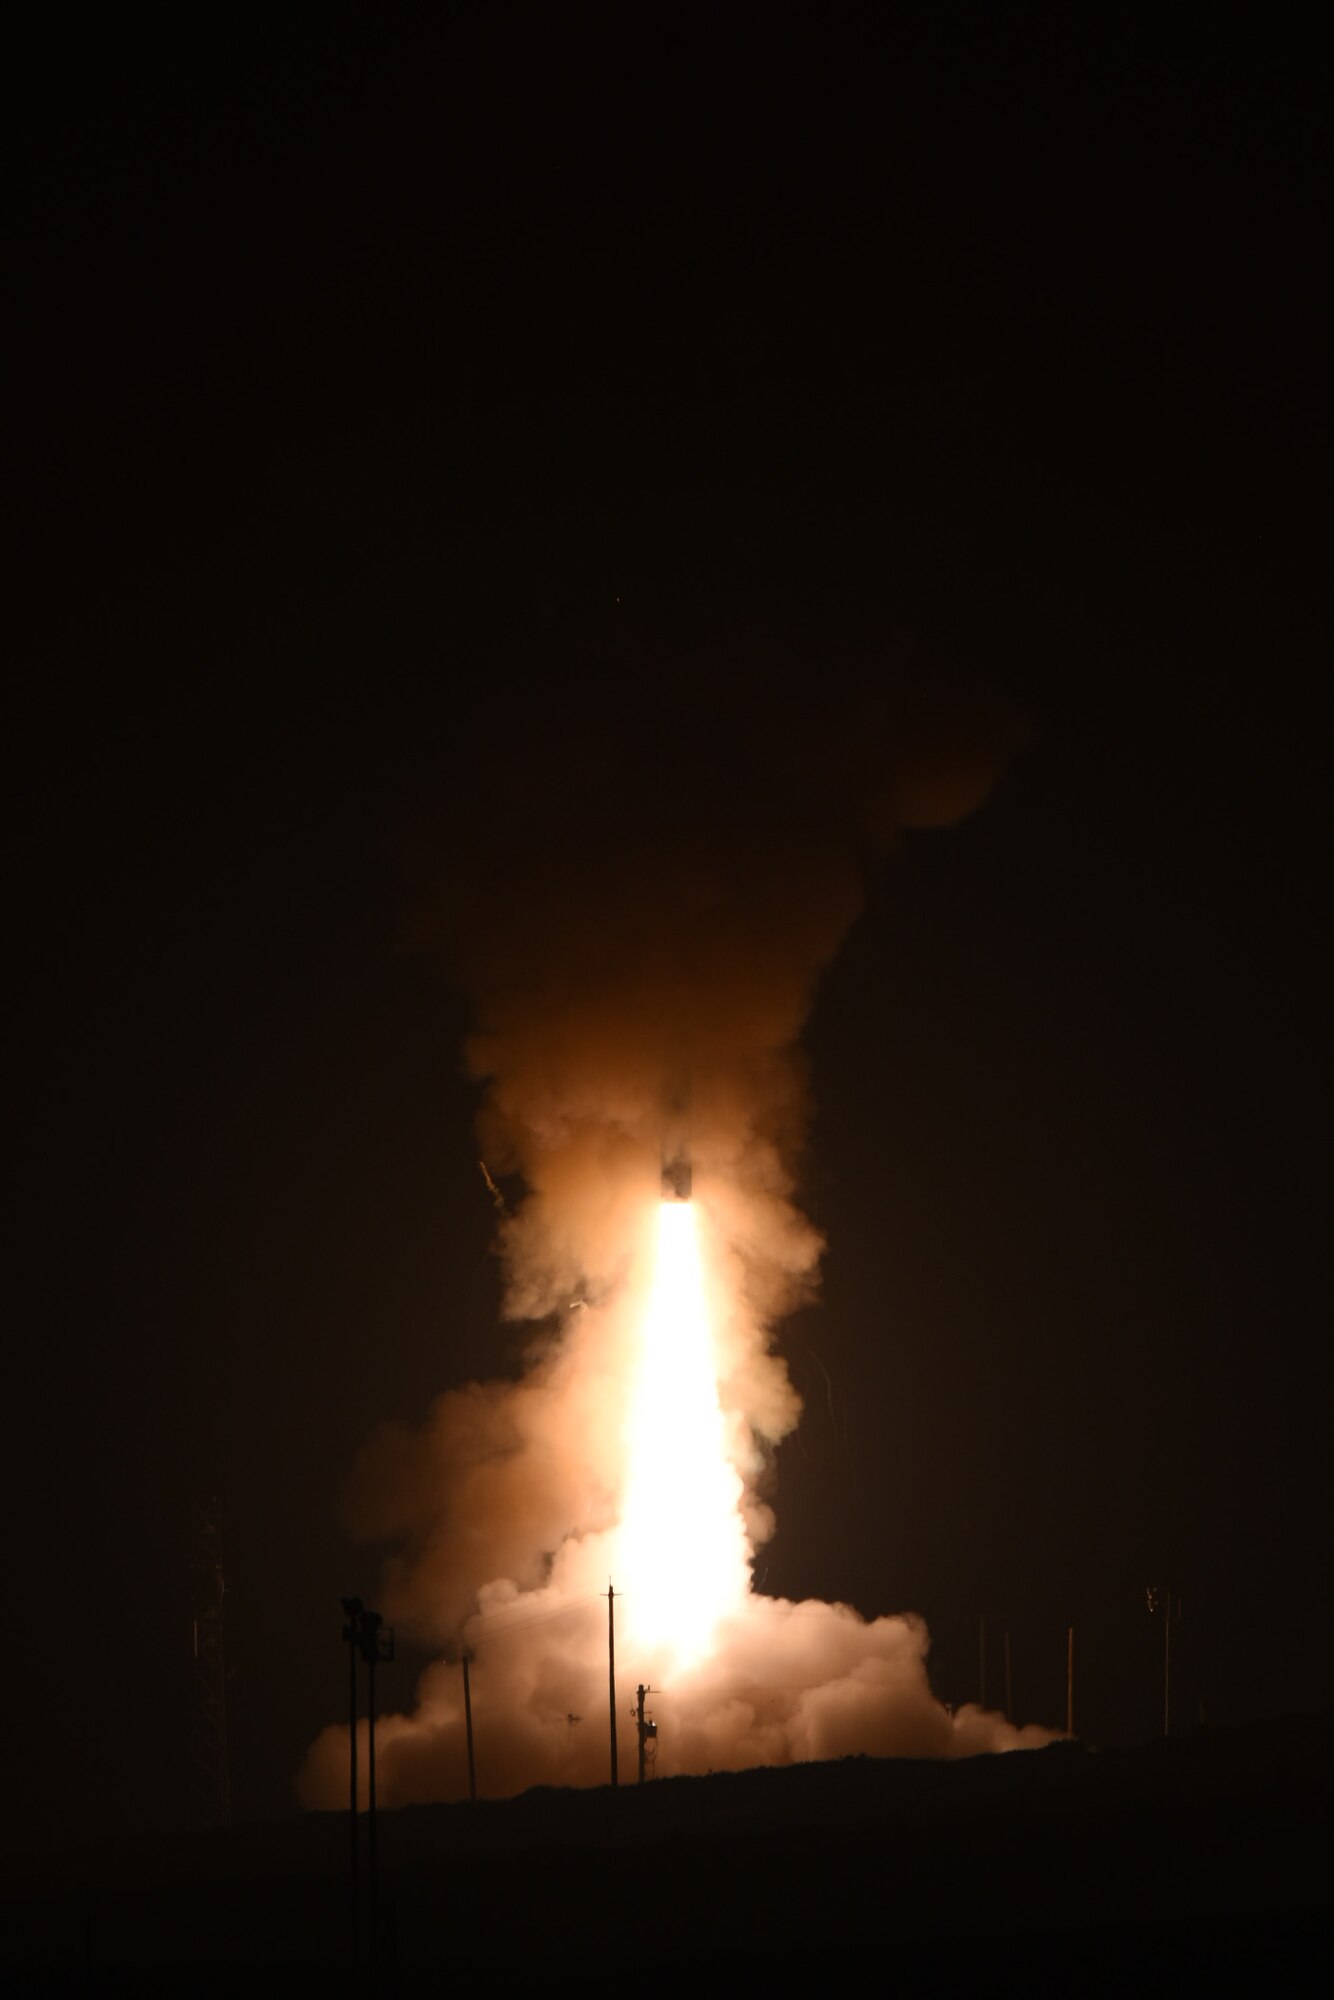 An unarmed Minuteman III intercontinental ballistic missile launches during an operational test at 12:02 a.m. Pacific Daylight Time Wednesday, May 3, 2017, at Vandenberg Air Force Base, Calif. (U.S. Air Force photo by Michael Peterson)